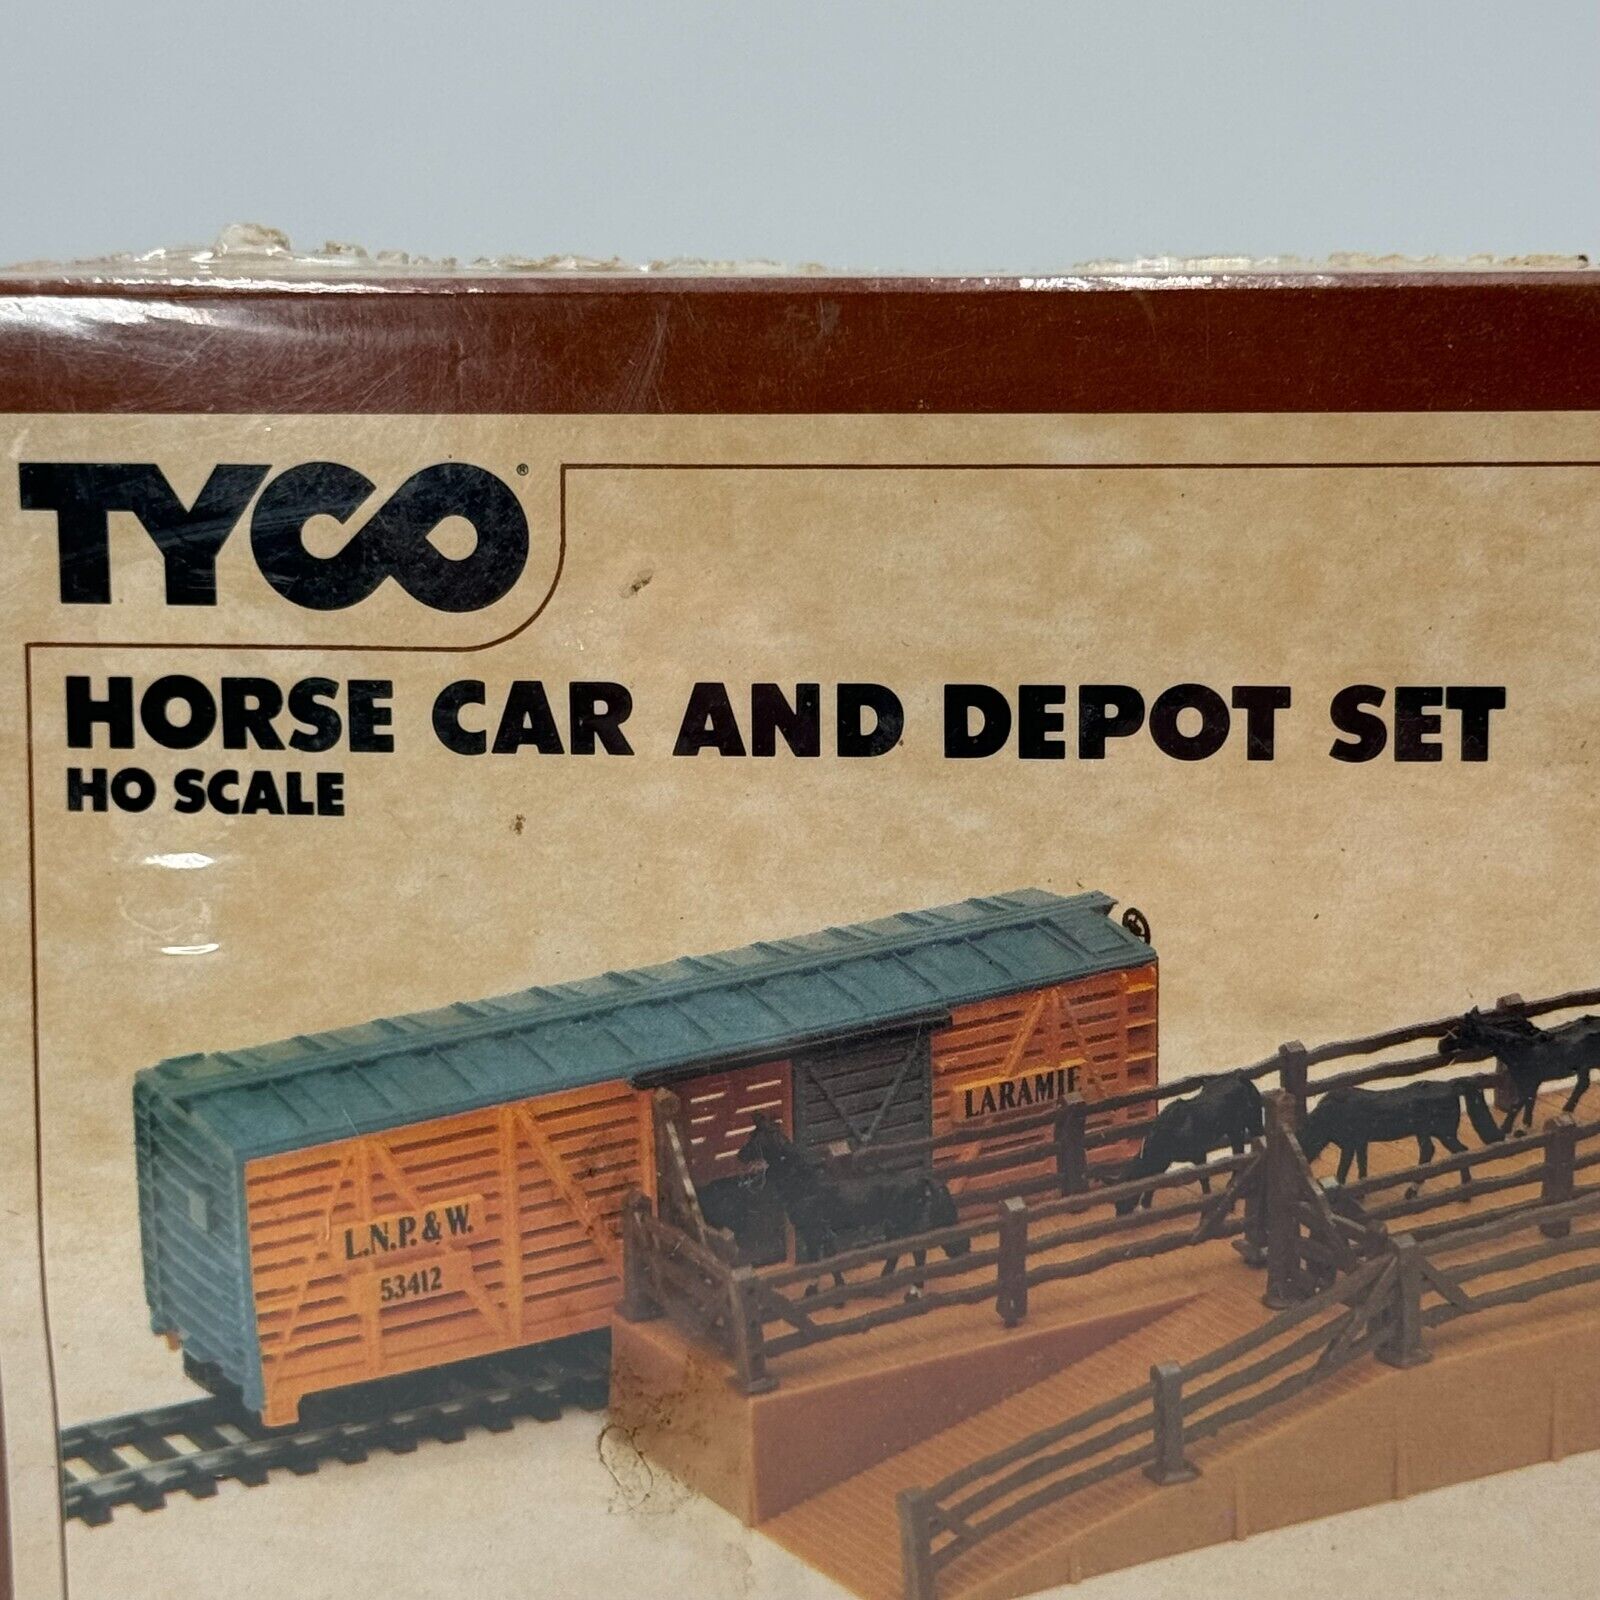 Vintage TYCO Horse Car and Depot Set Decorated Model Train Kit HO Scale New